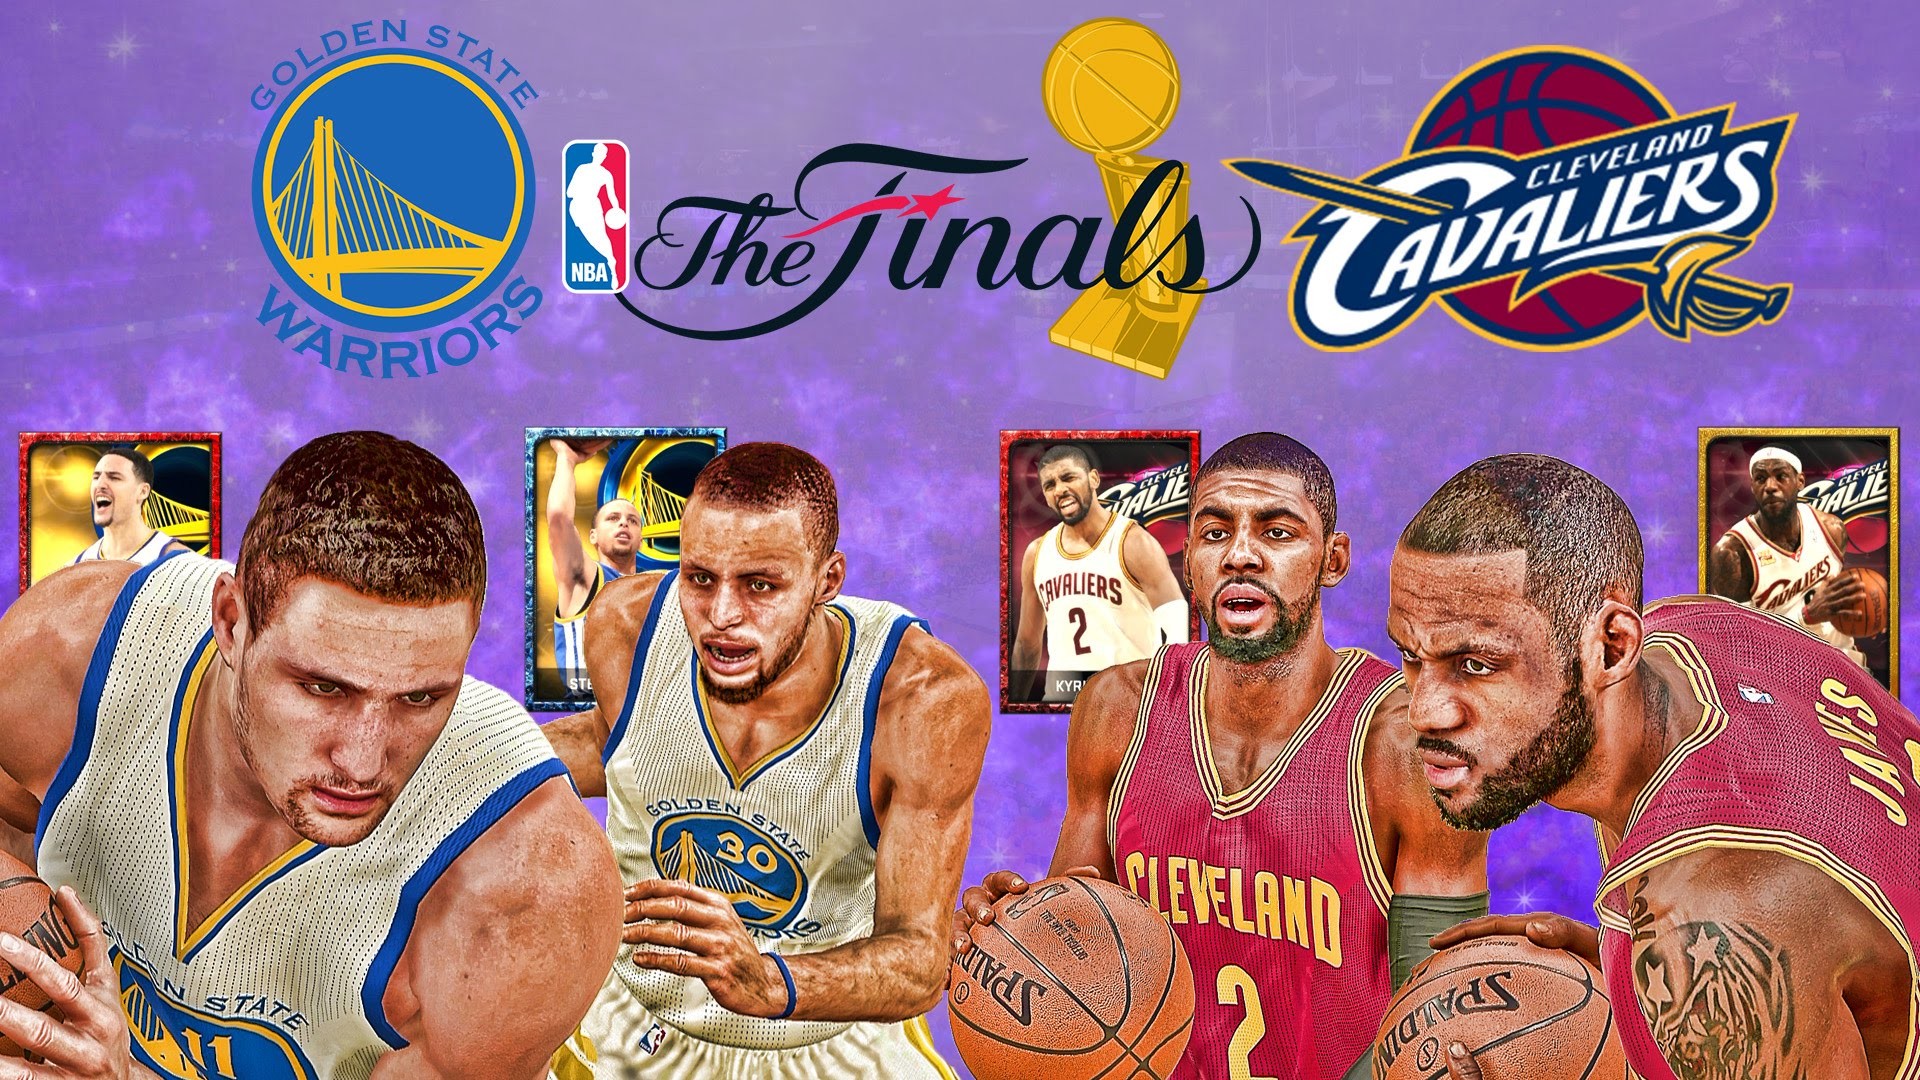 1920x1080 The Highly Anticipated NBA Finals